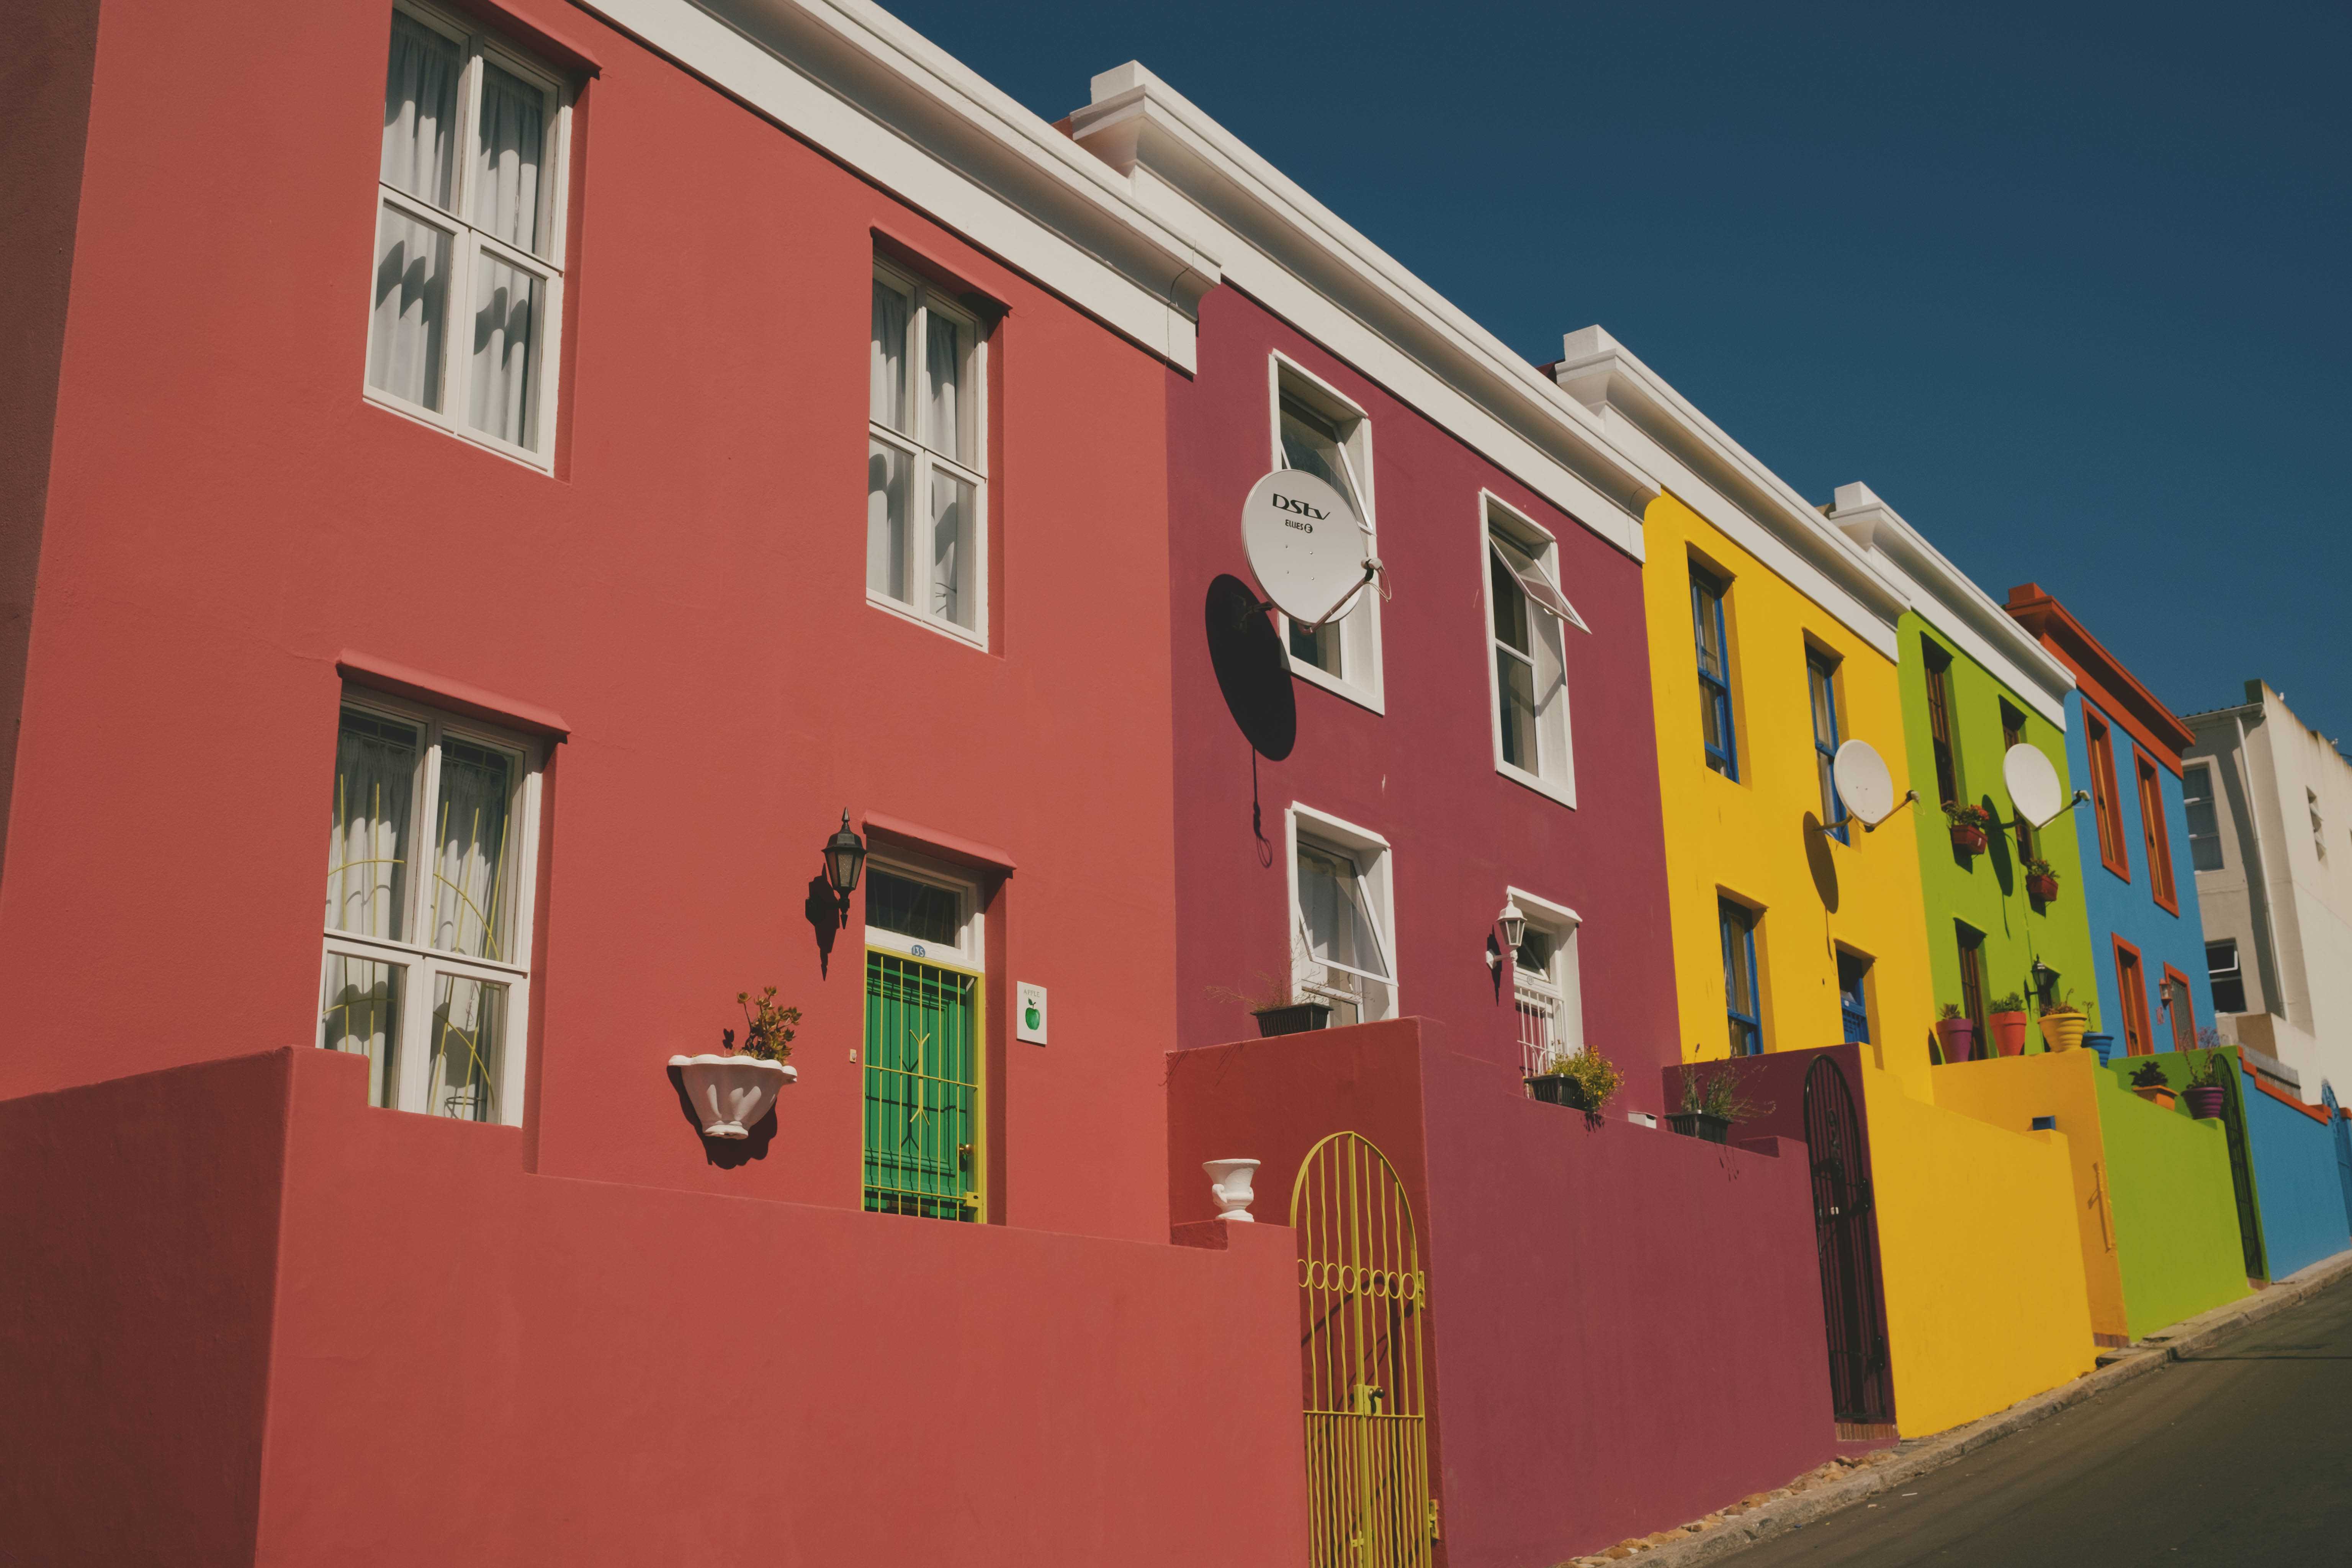 Row of brightly-colored houses along a hilly street